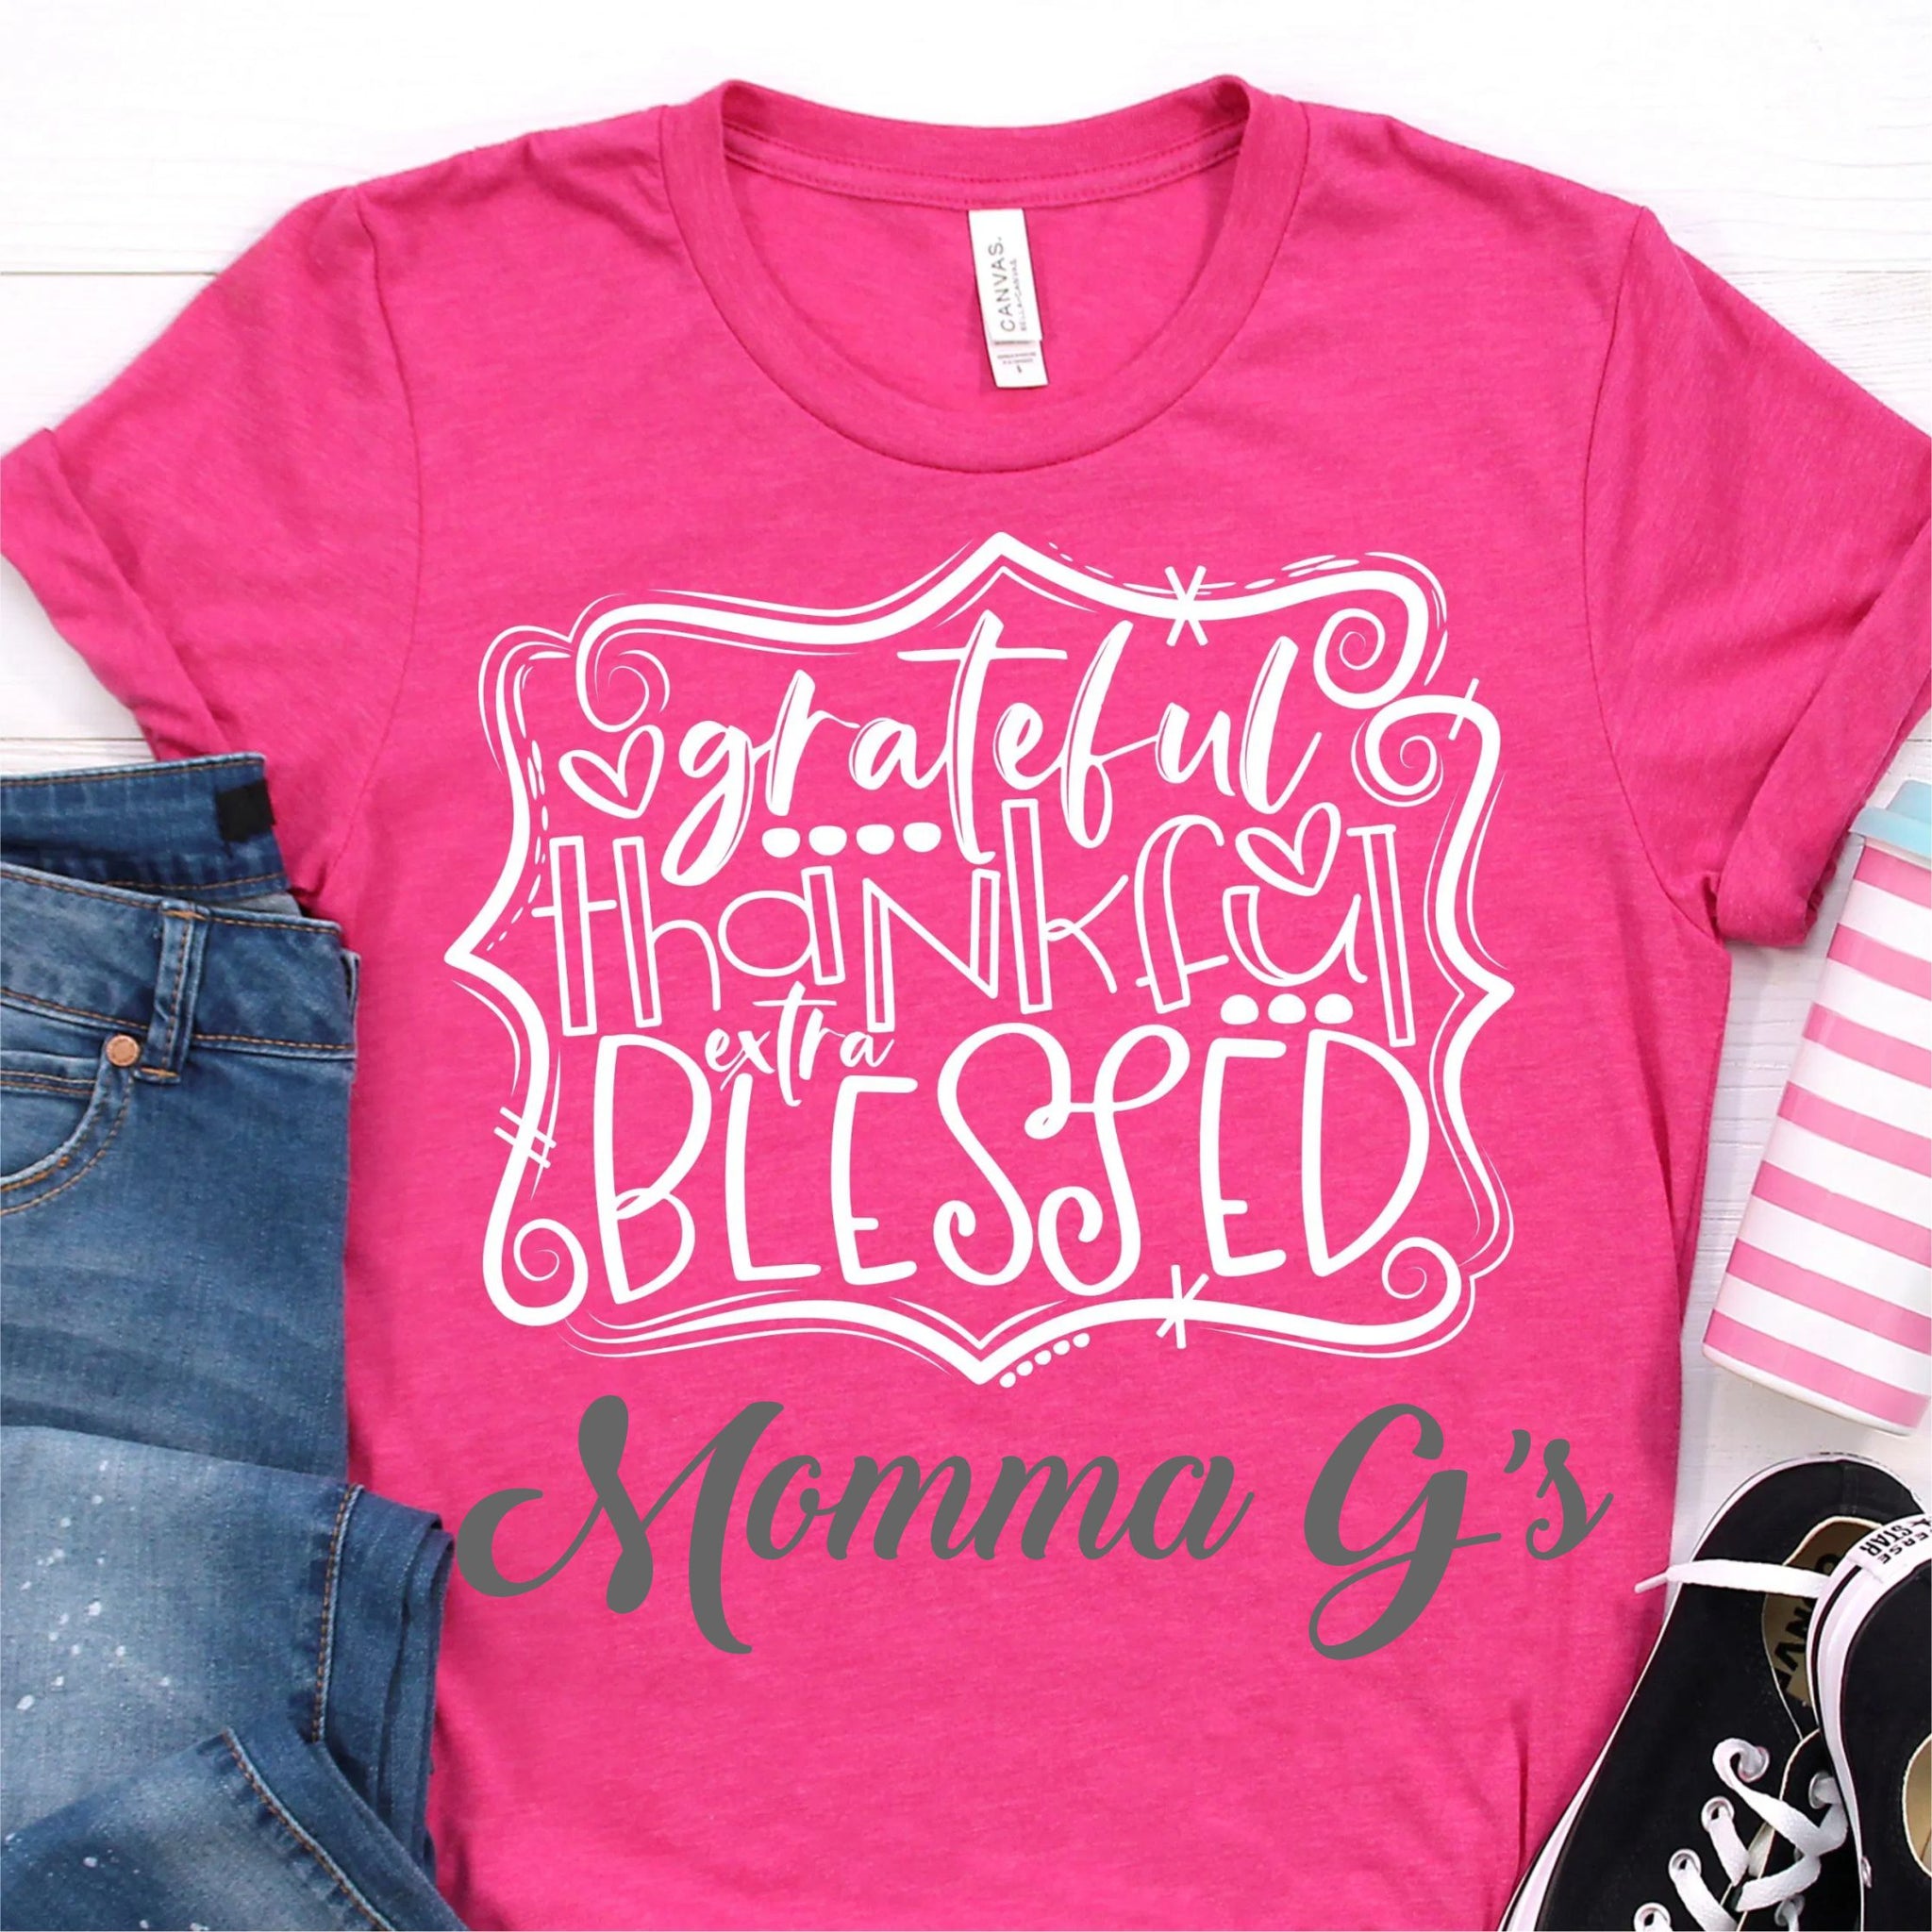 Grateful Thankful Extra Blessed T-shirt - Momma G's Children's Boutique, Screen Printing, Embroidery & More